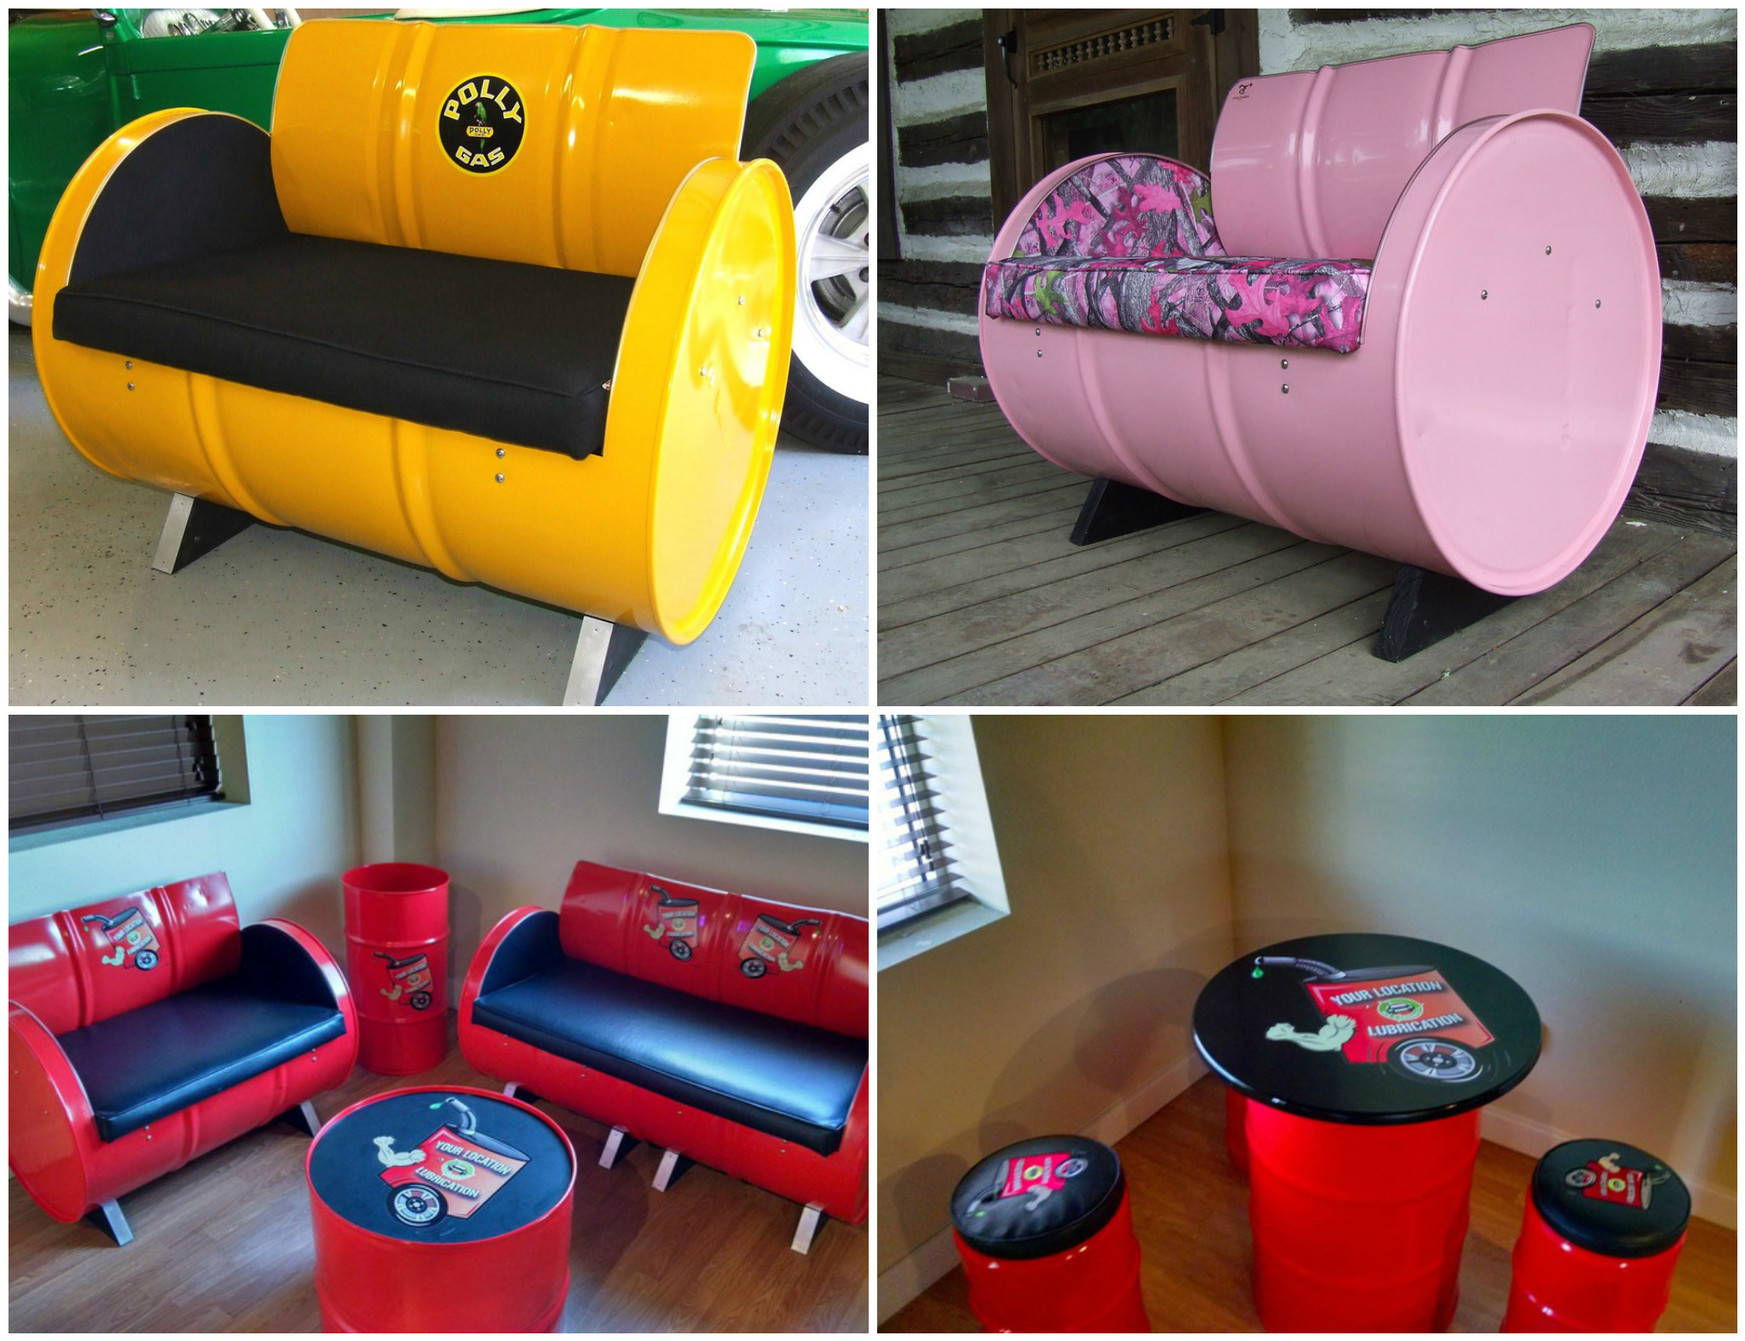 55 Gallon Steel Drums Upcycled Into Furniture